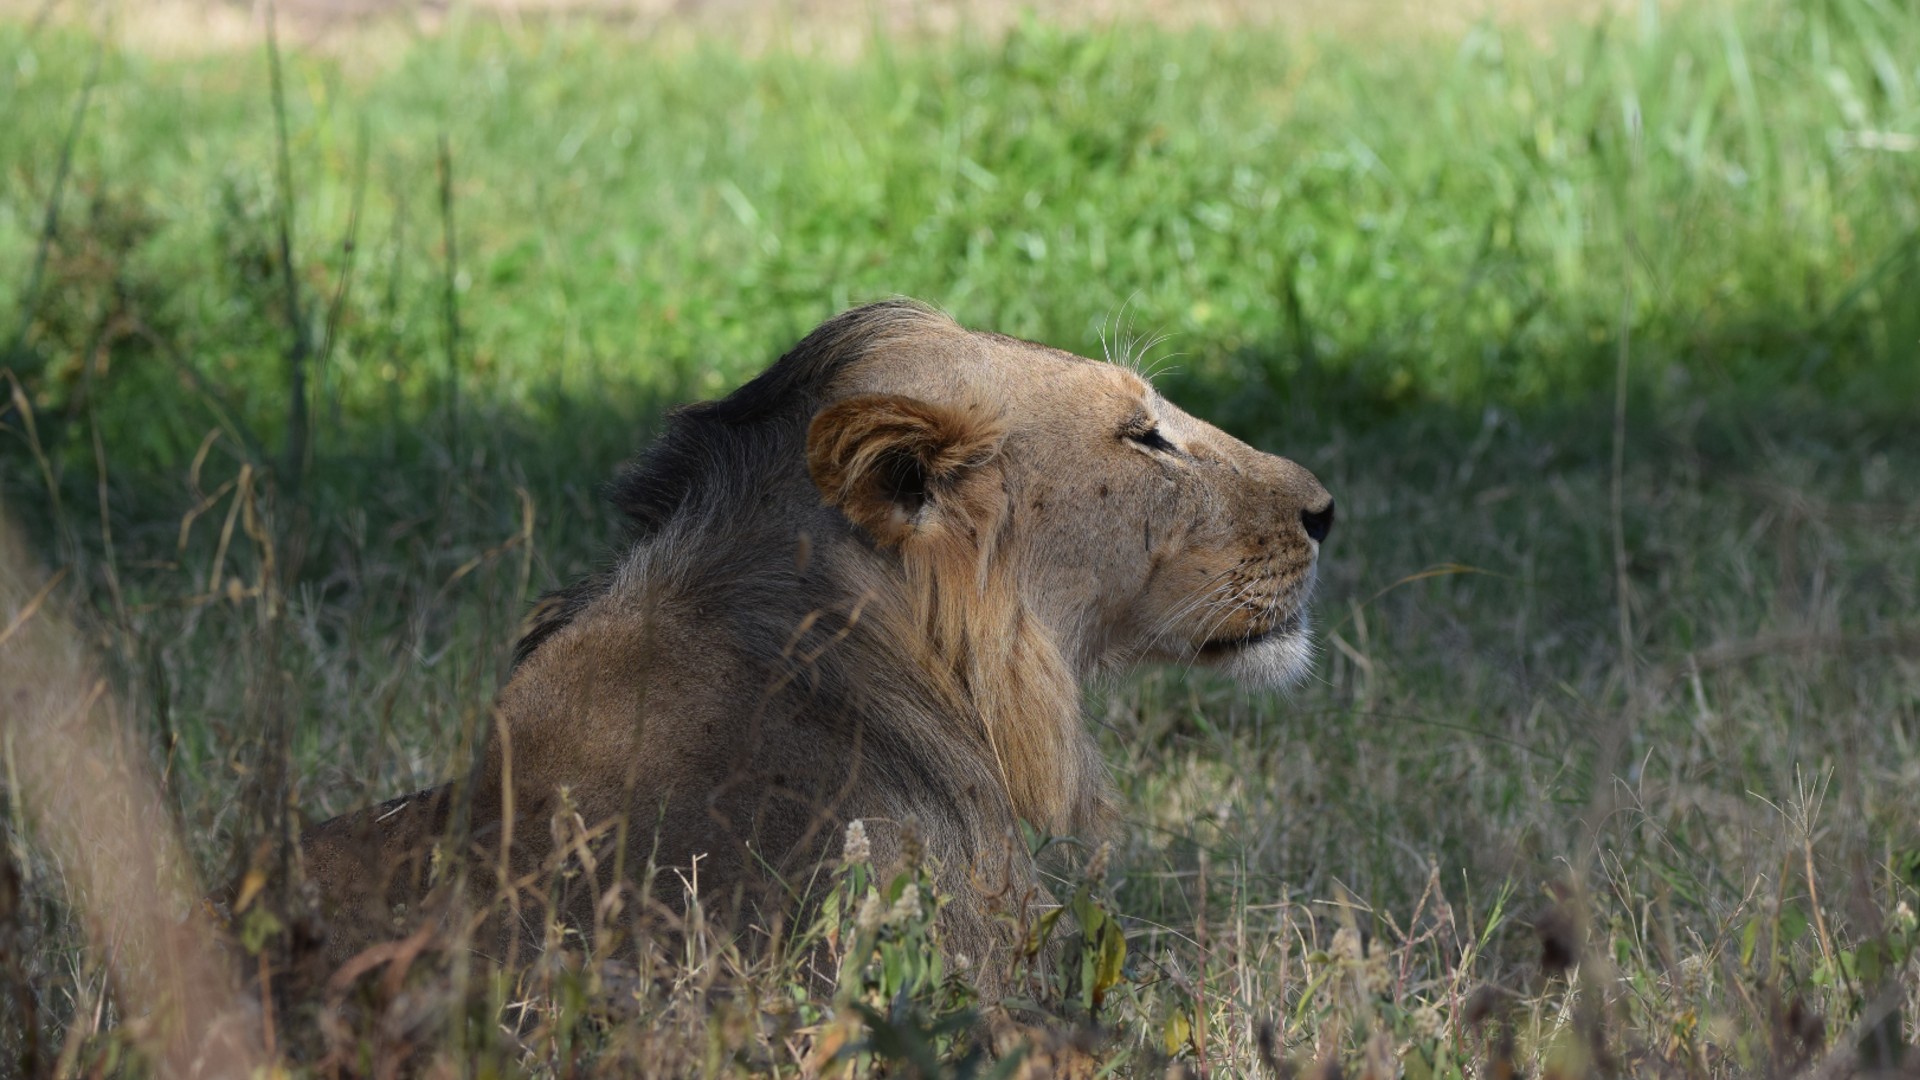 A young wild lion lying in the long grass with his mane blowing in the wind